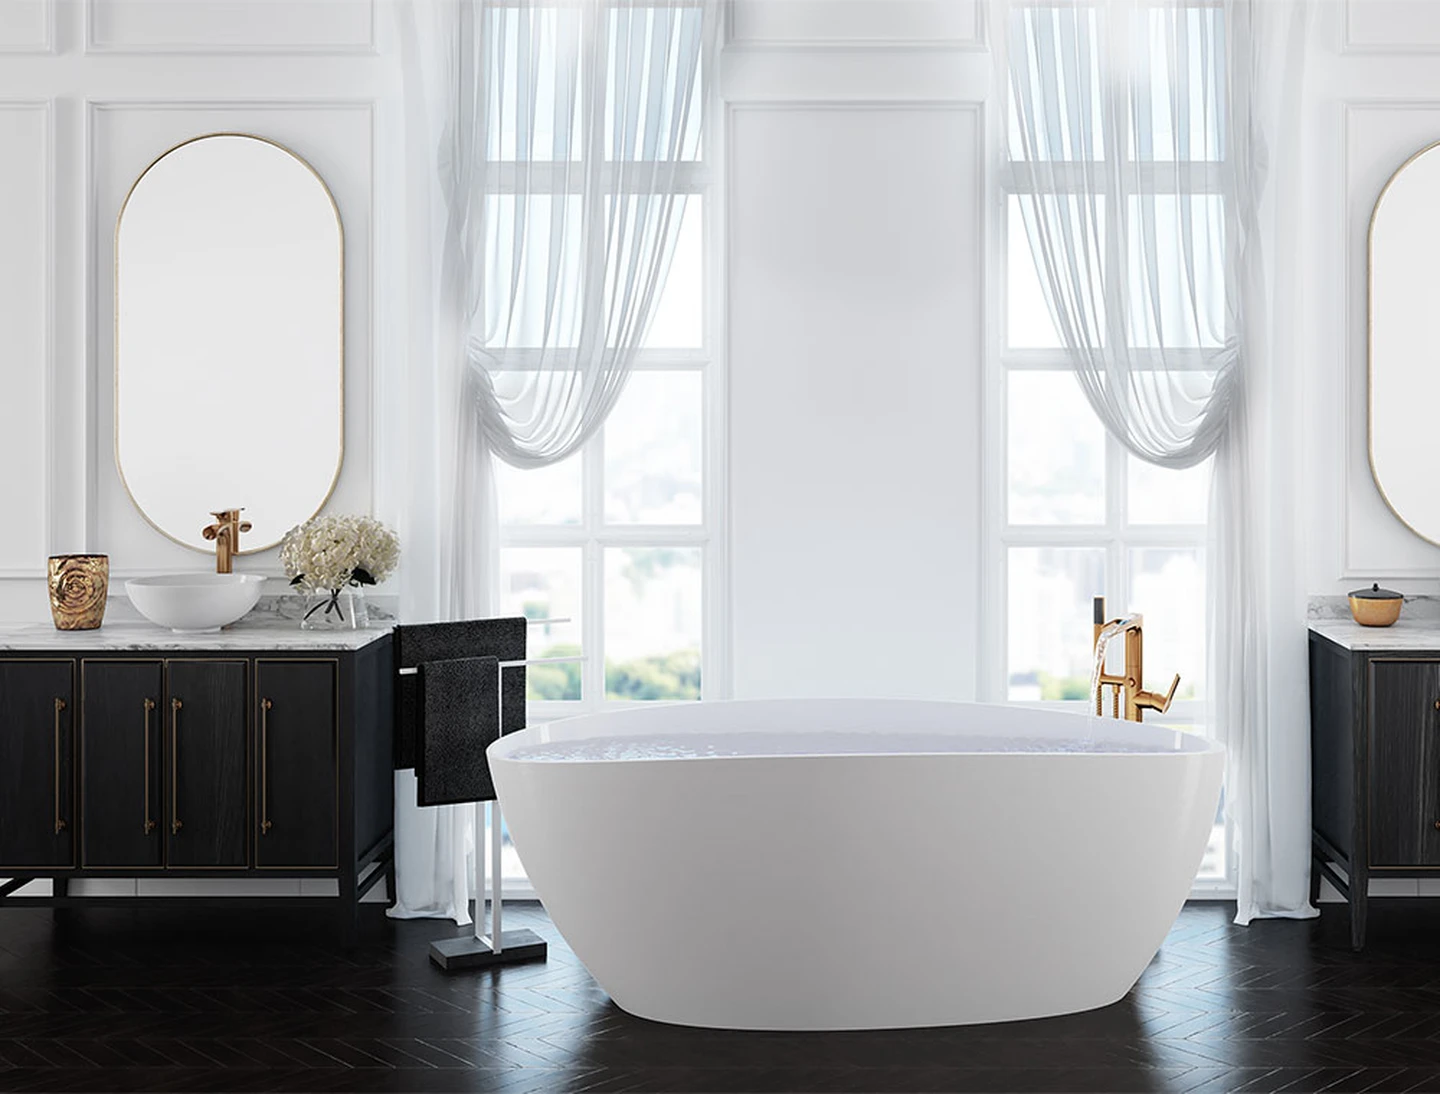 You are currently viewing Jacuzzi Bath Remodel Reviews – Don’t Miss Out On This Luxurious Upgrade!